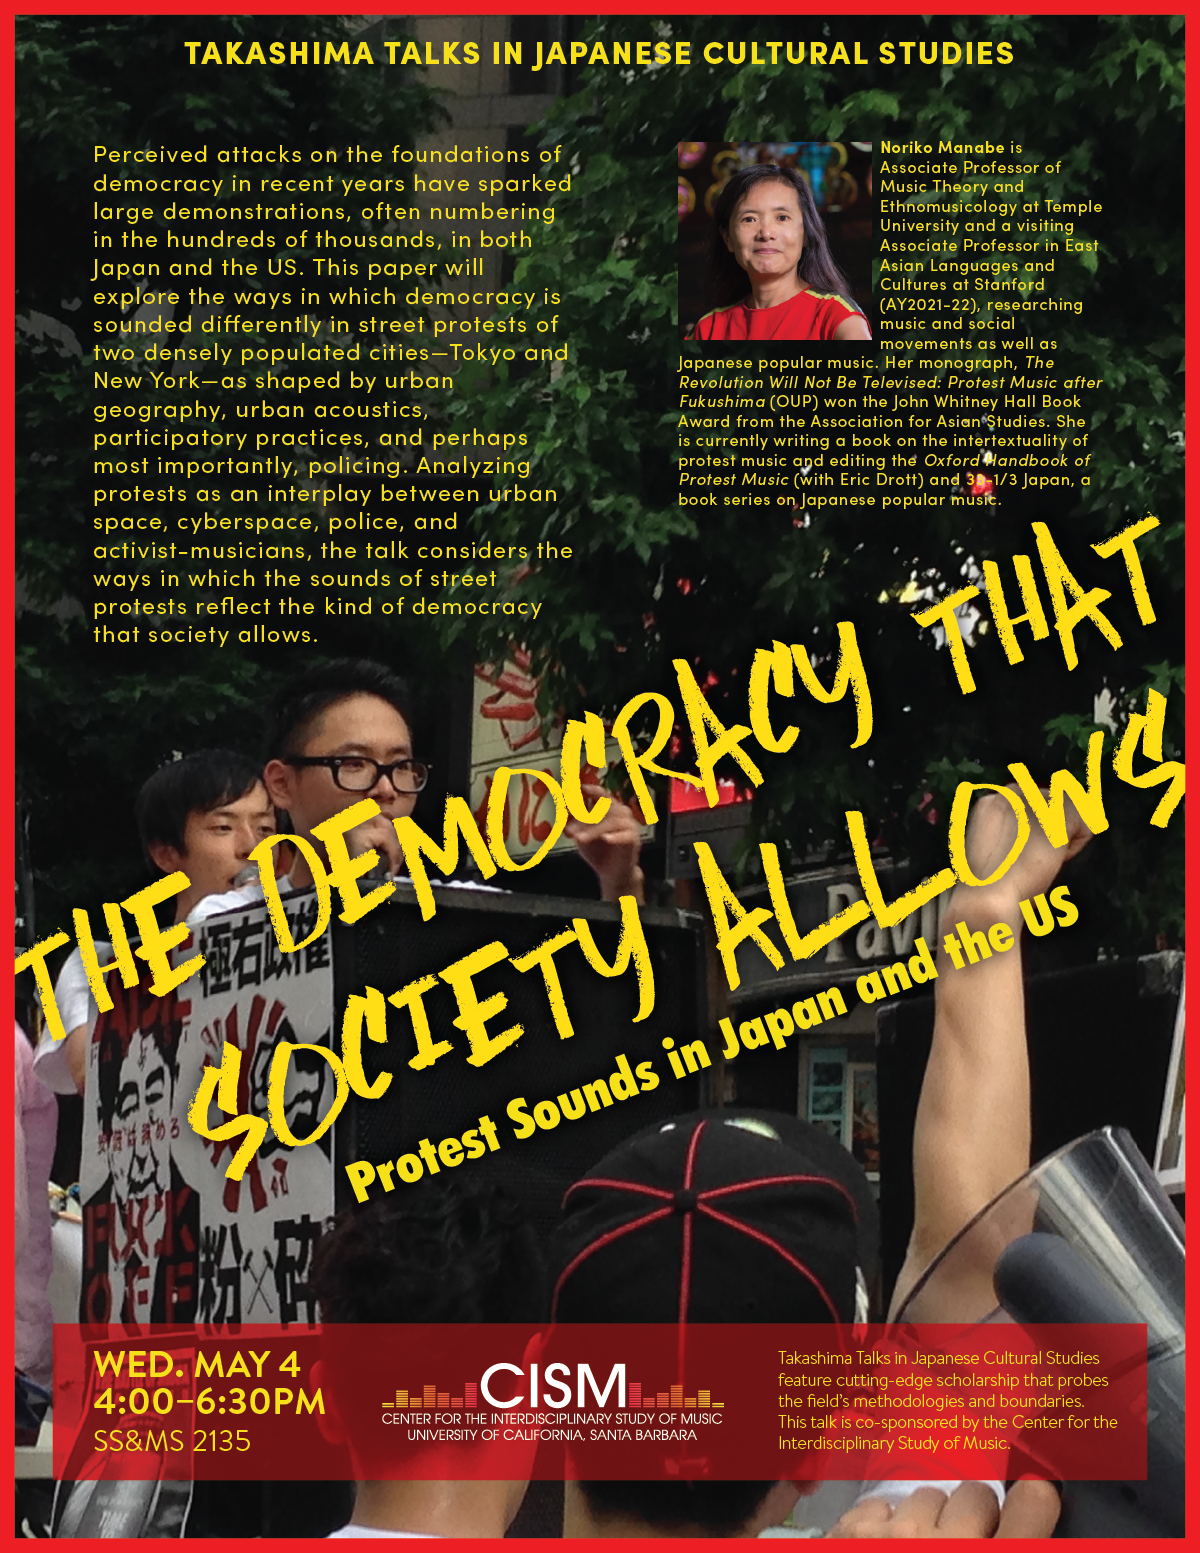 Flyer for "Takashima Talks in Japanese Cultural Studies: The Democracy that Society Allows, Protest Sounds Japan and the US" with Noriko Manabe on May 4, 2022 from 4-6:30PM in SS&MS 2135